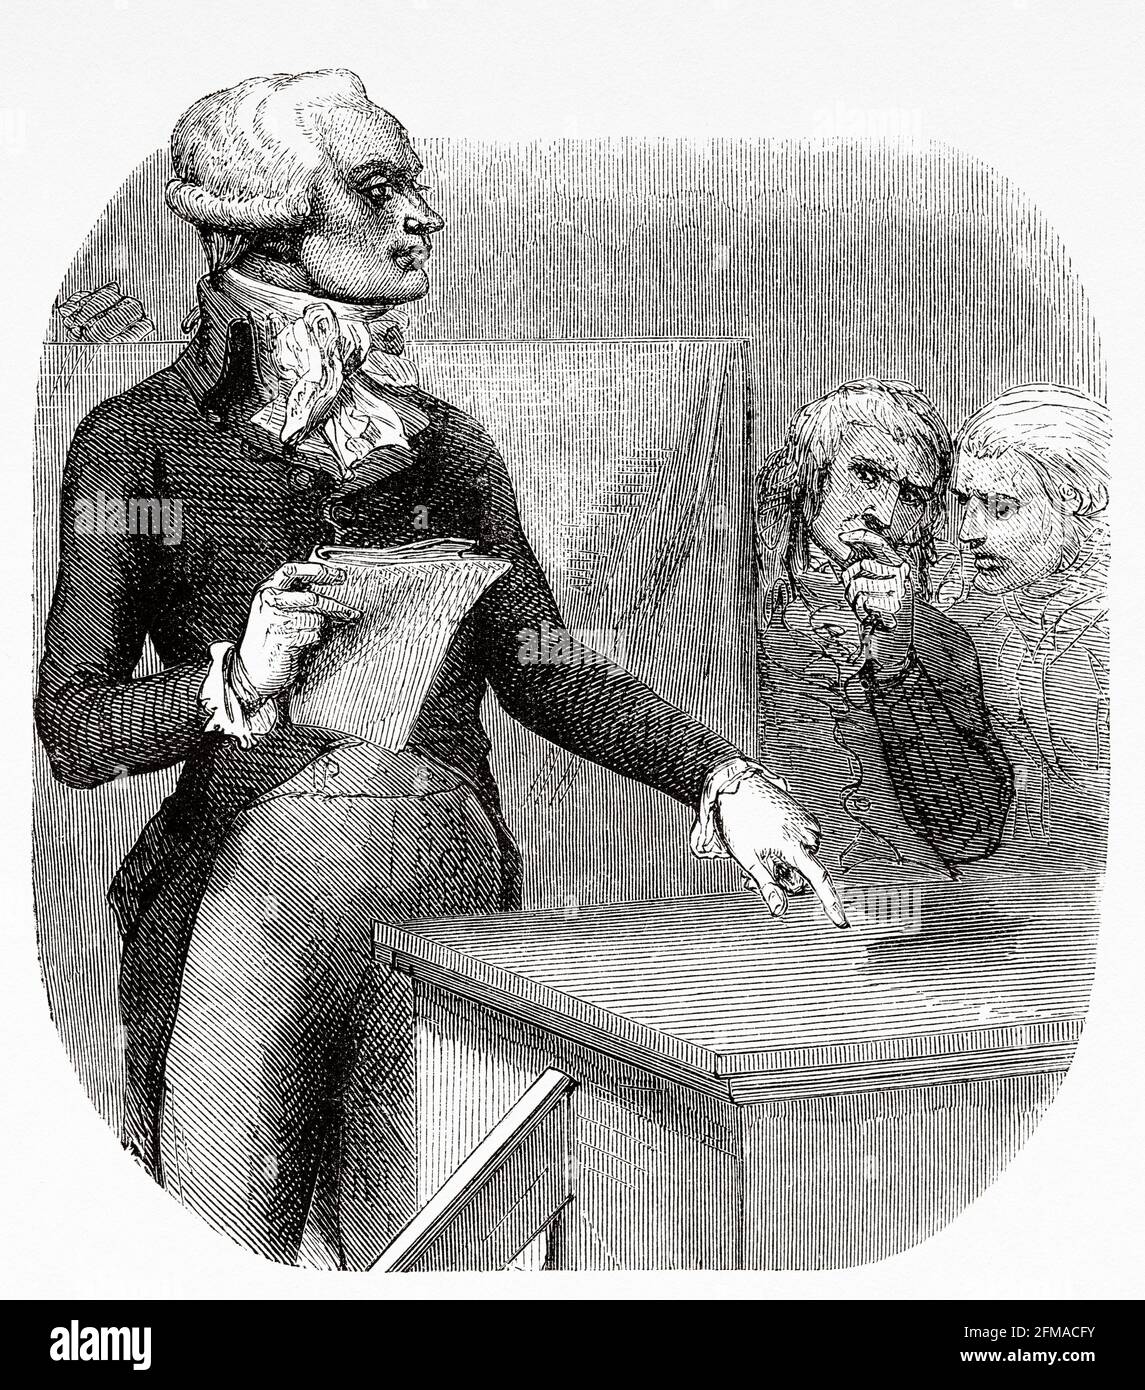 Portrait of Maximilian de Robespierre (1758-1794) in the rostrum on 8 Thermidor. France. Old 19th century engraved illustration from Histoire de la Revolution Francaise 1876 by Jules Michelet (1798-1874) Stock Photo